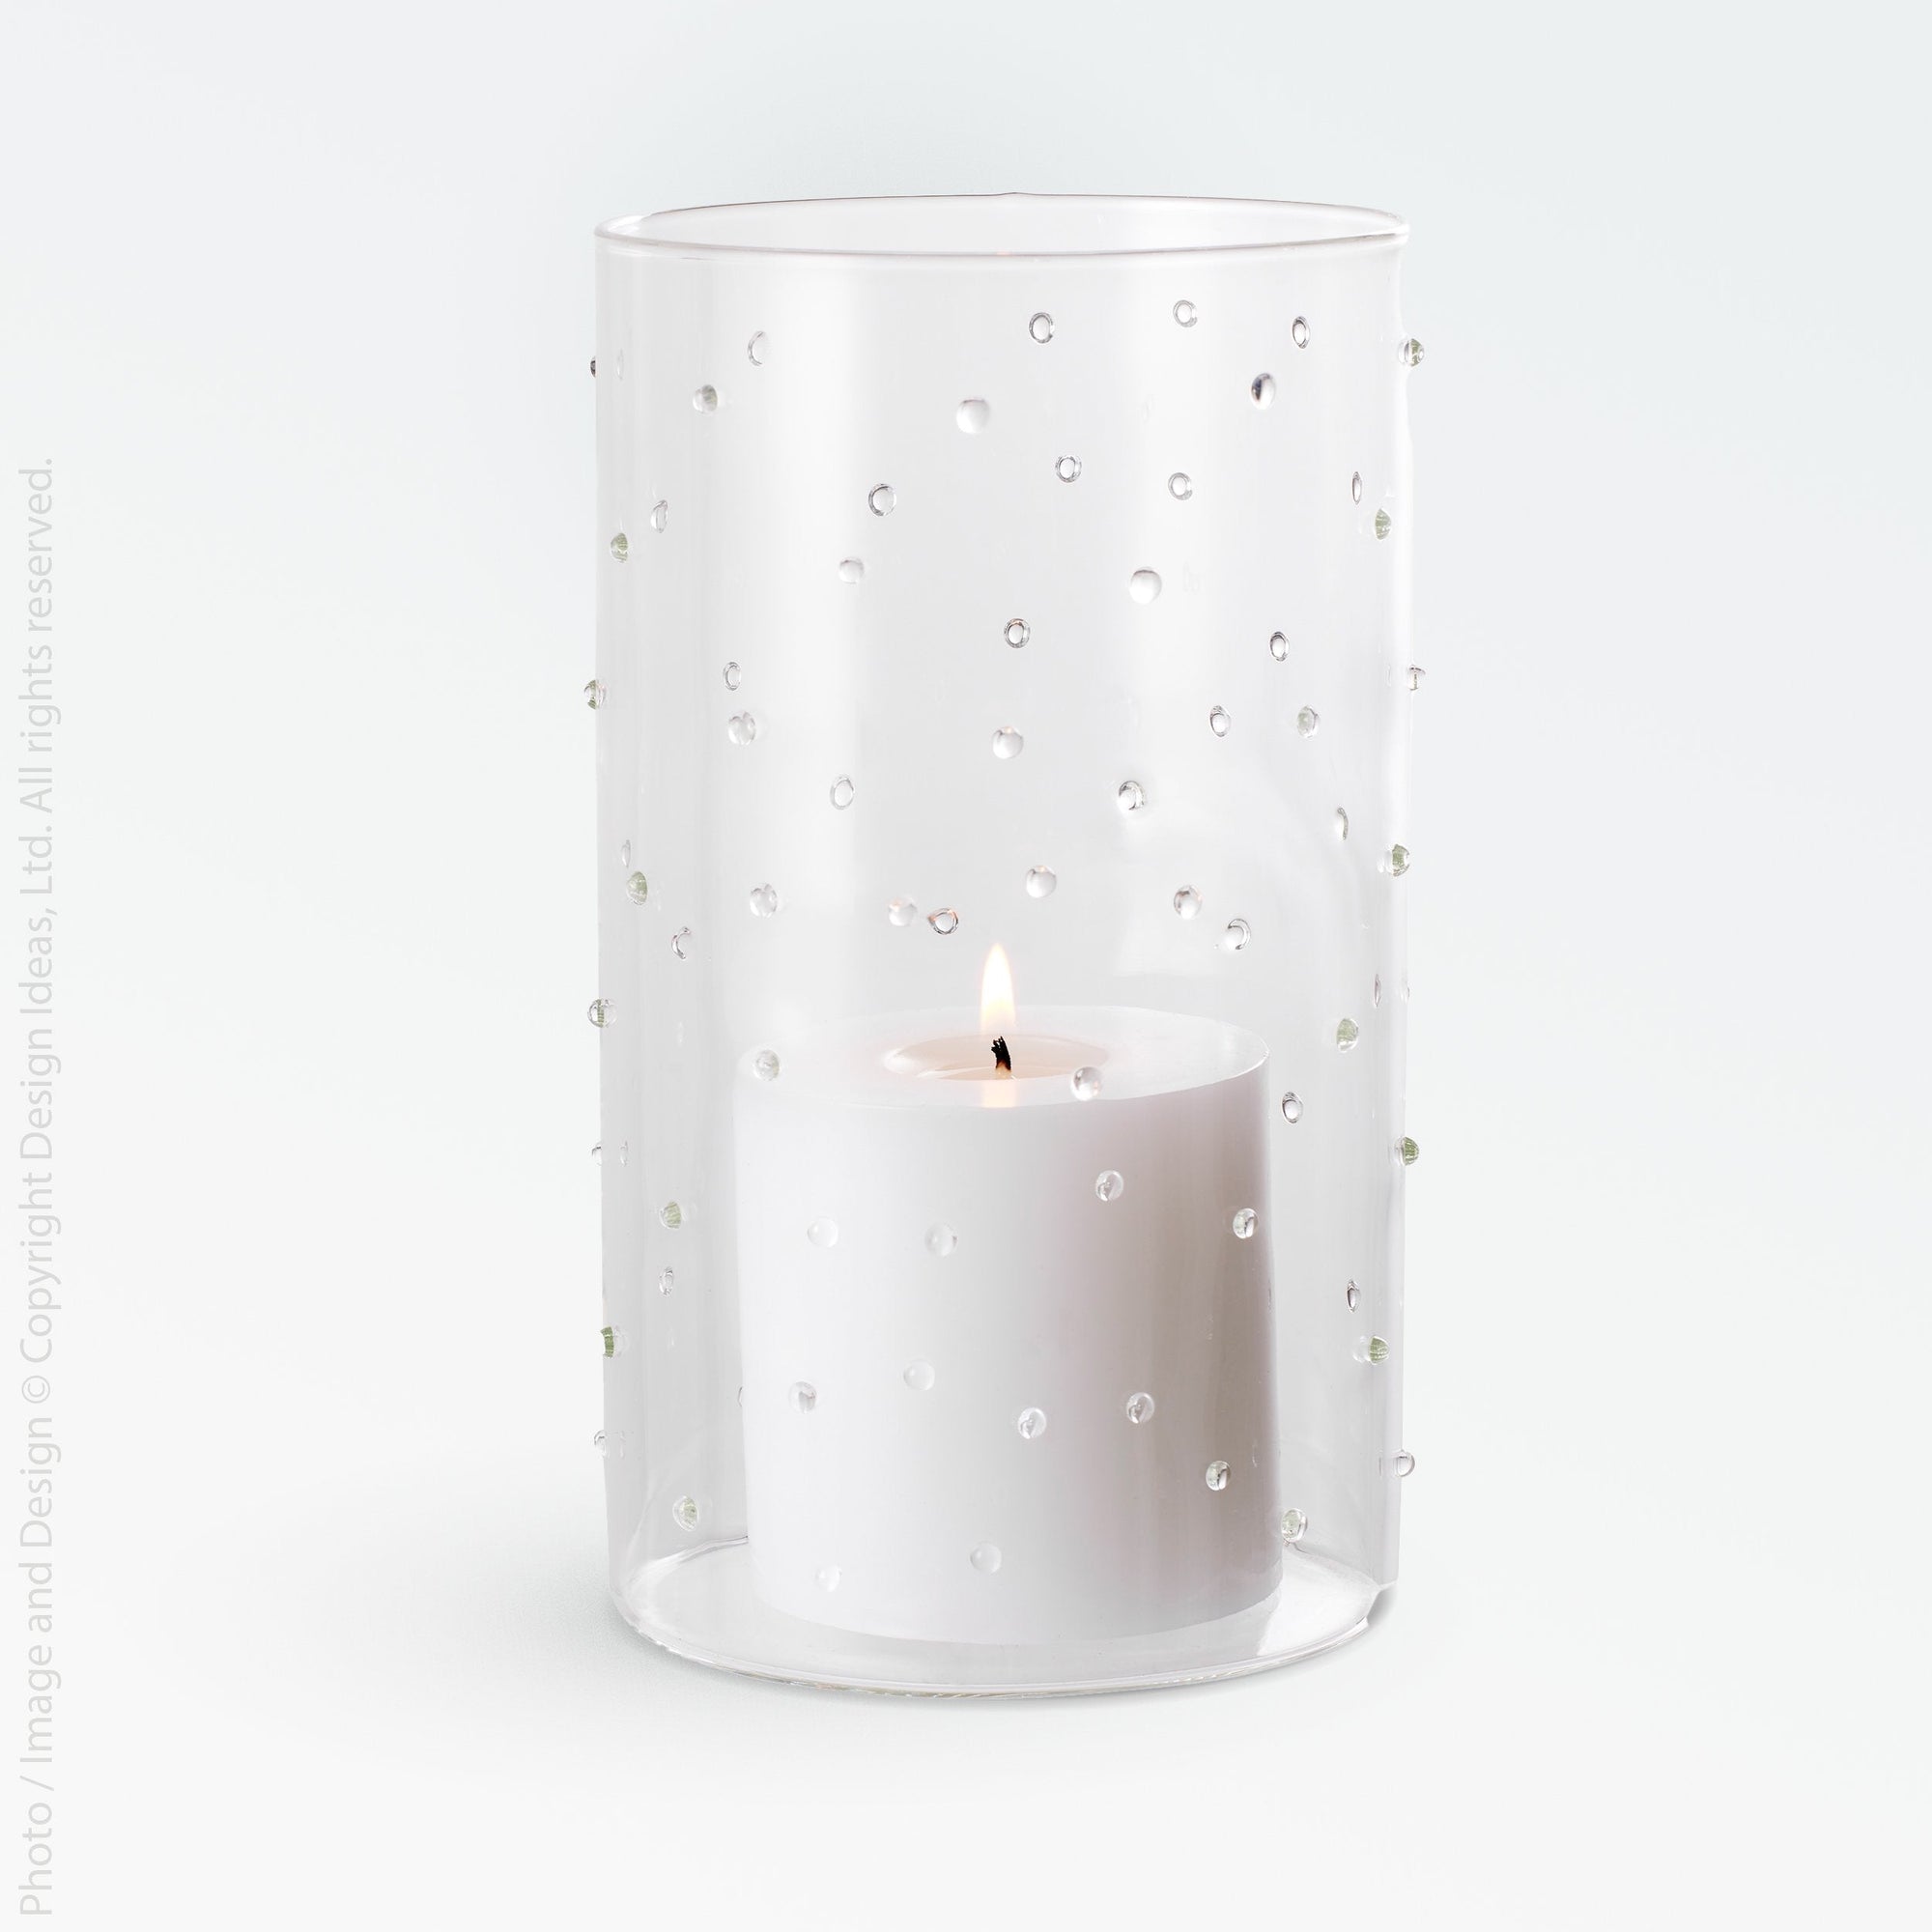 Livenza™ hurricane (7.7 in) - Clear | Image 1 | Premium Candleholder from the Livenza collection | made with Borosilicate Glass for long lasting use | texxture